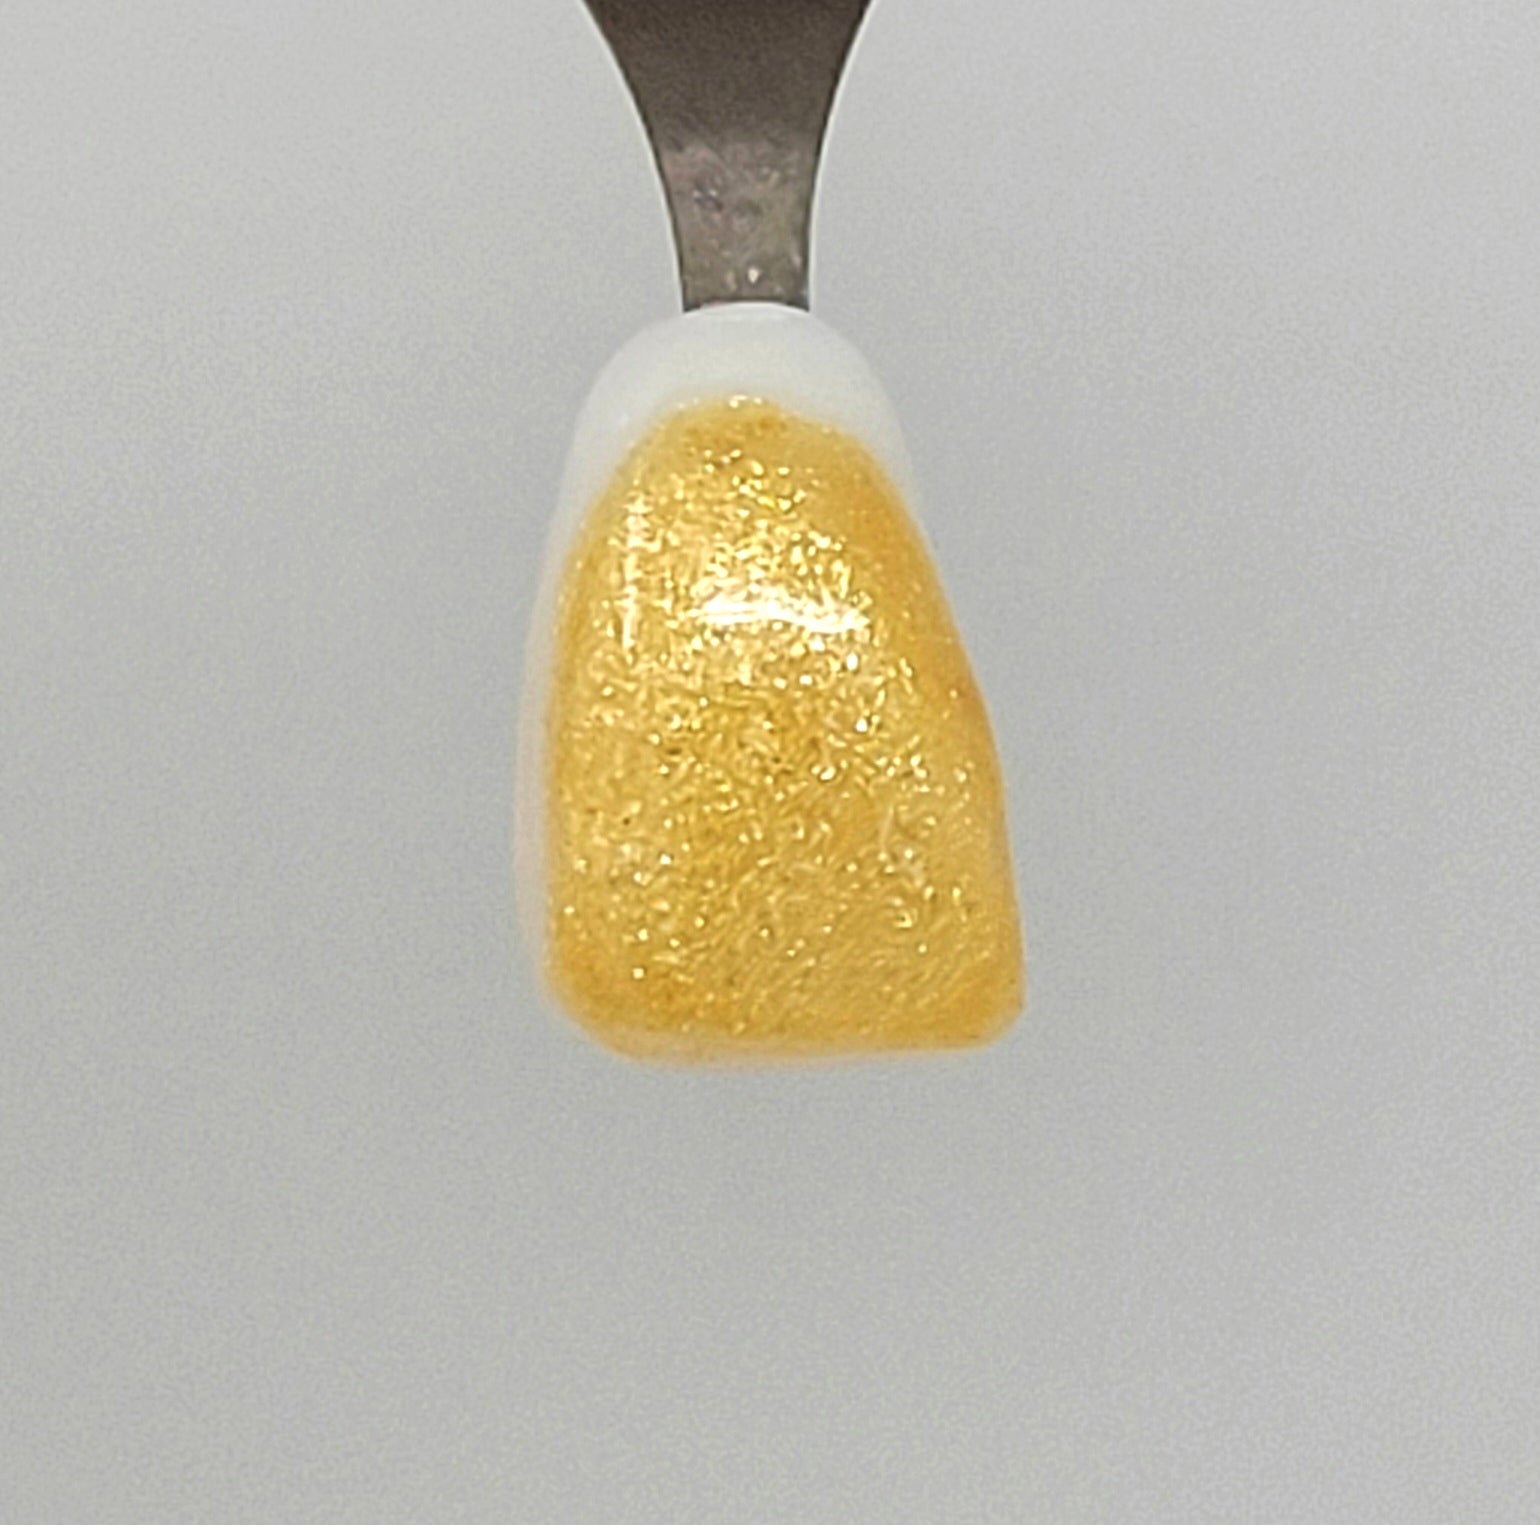 Fine Light Gold Sparkle Temporary Tattooth Colorant on a demo tooth.  These colorants can be applied to teeth to temporarily alter their color or iridescence.